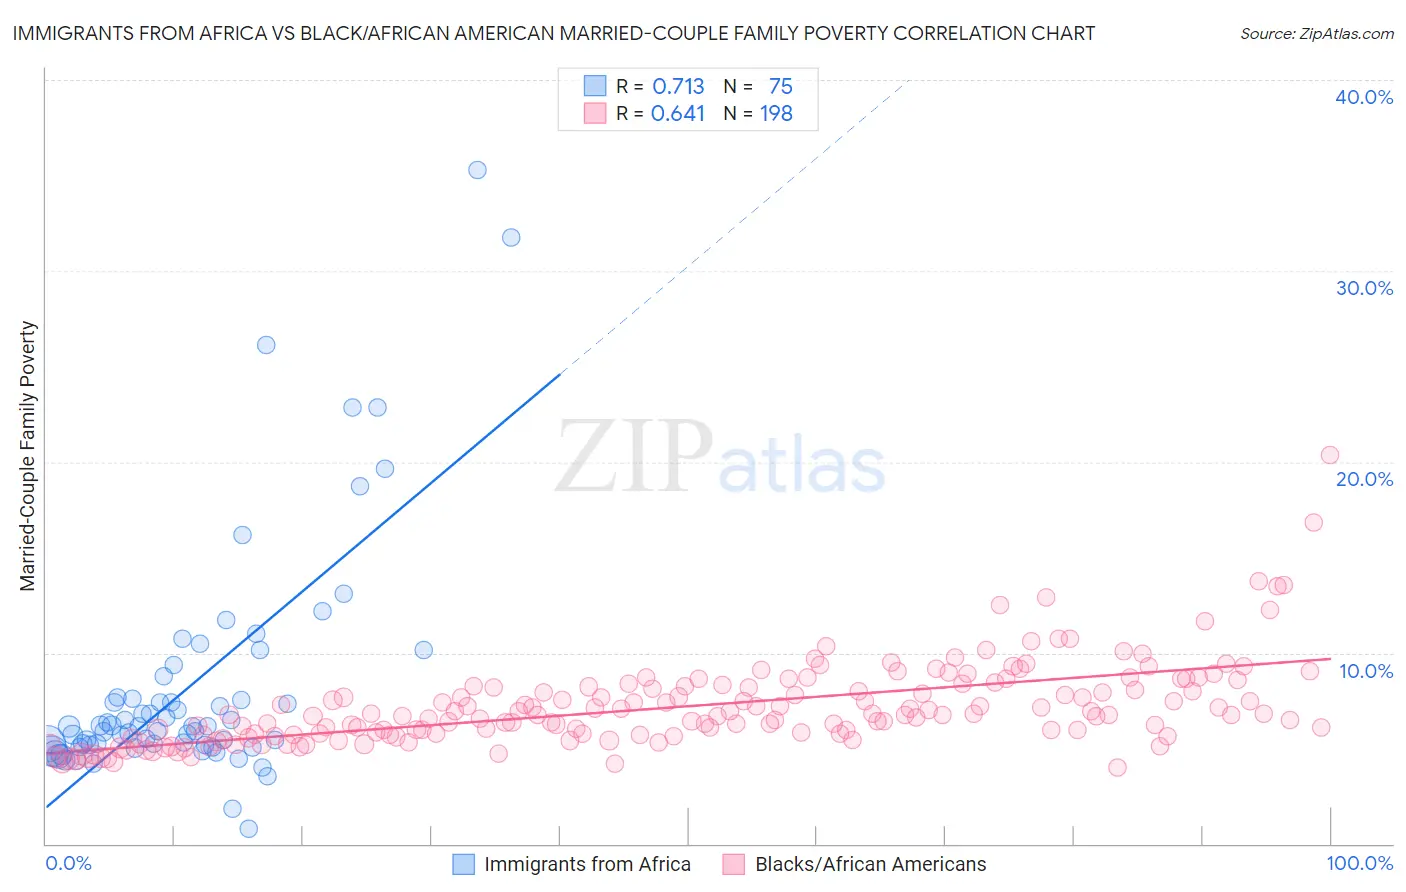 Immigrants from Africa vs Black/African American Married-Couple Family Poverty